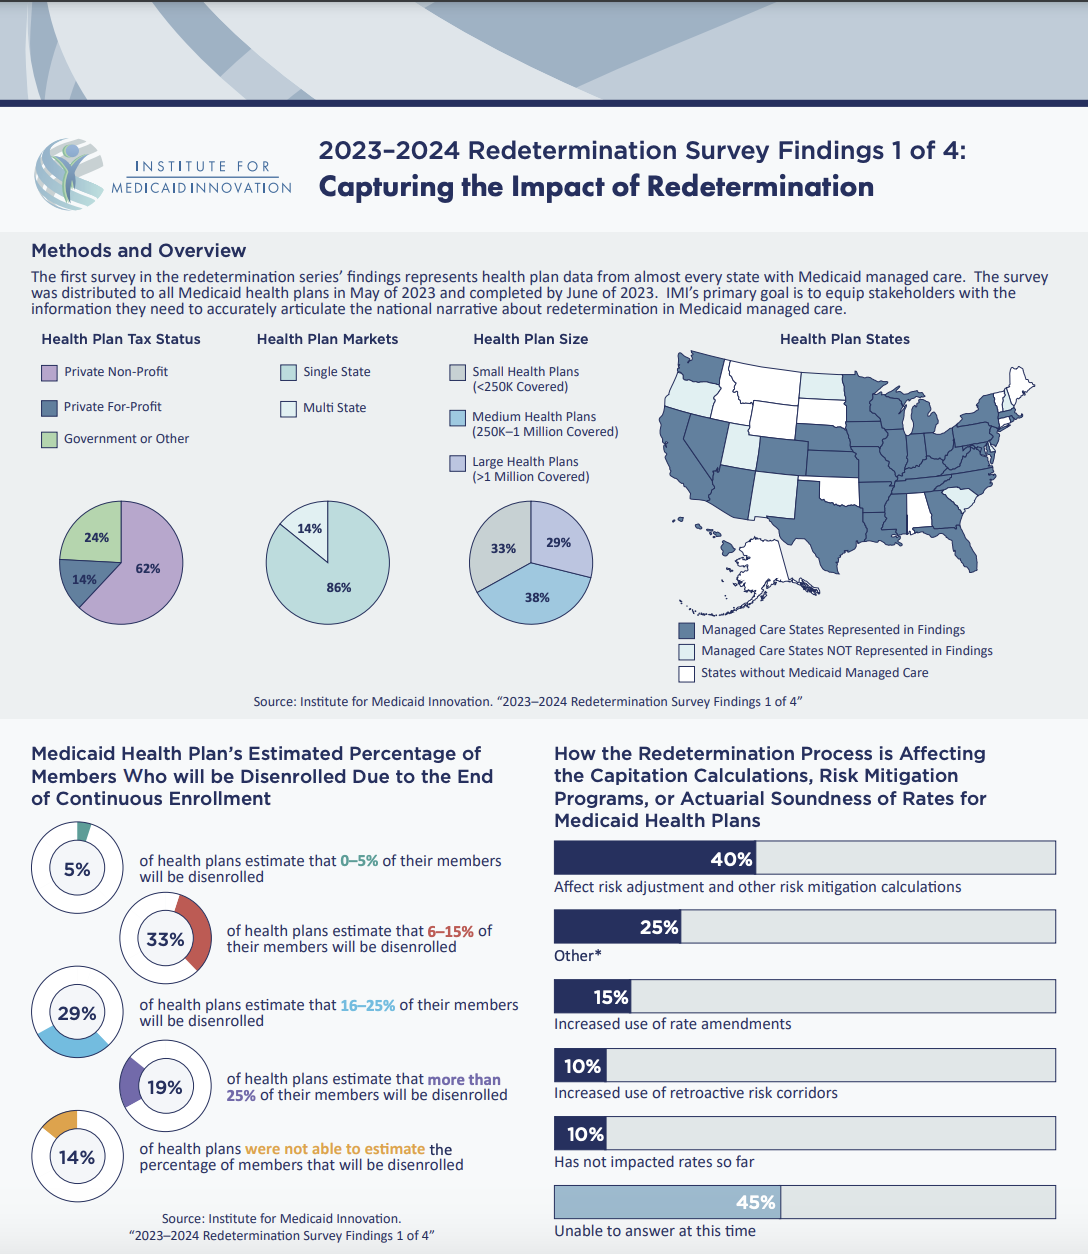 2023-2024 Redetermination Survey Findings 1 of 4